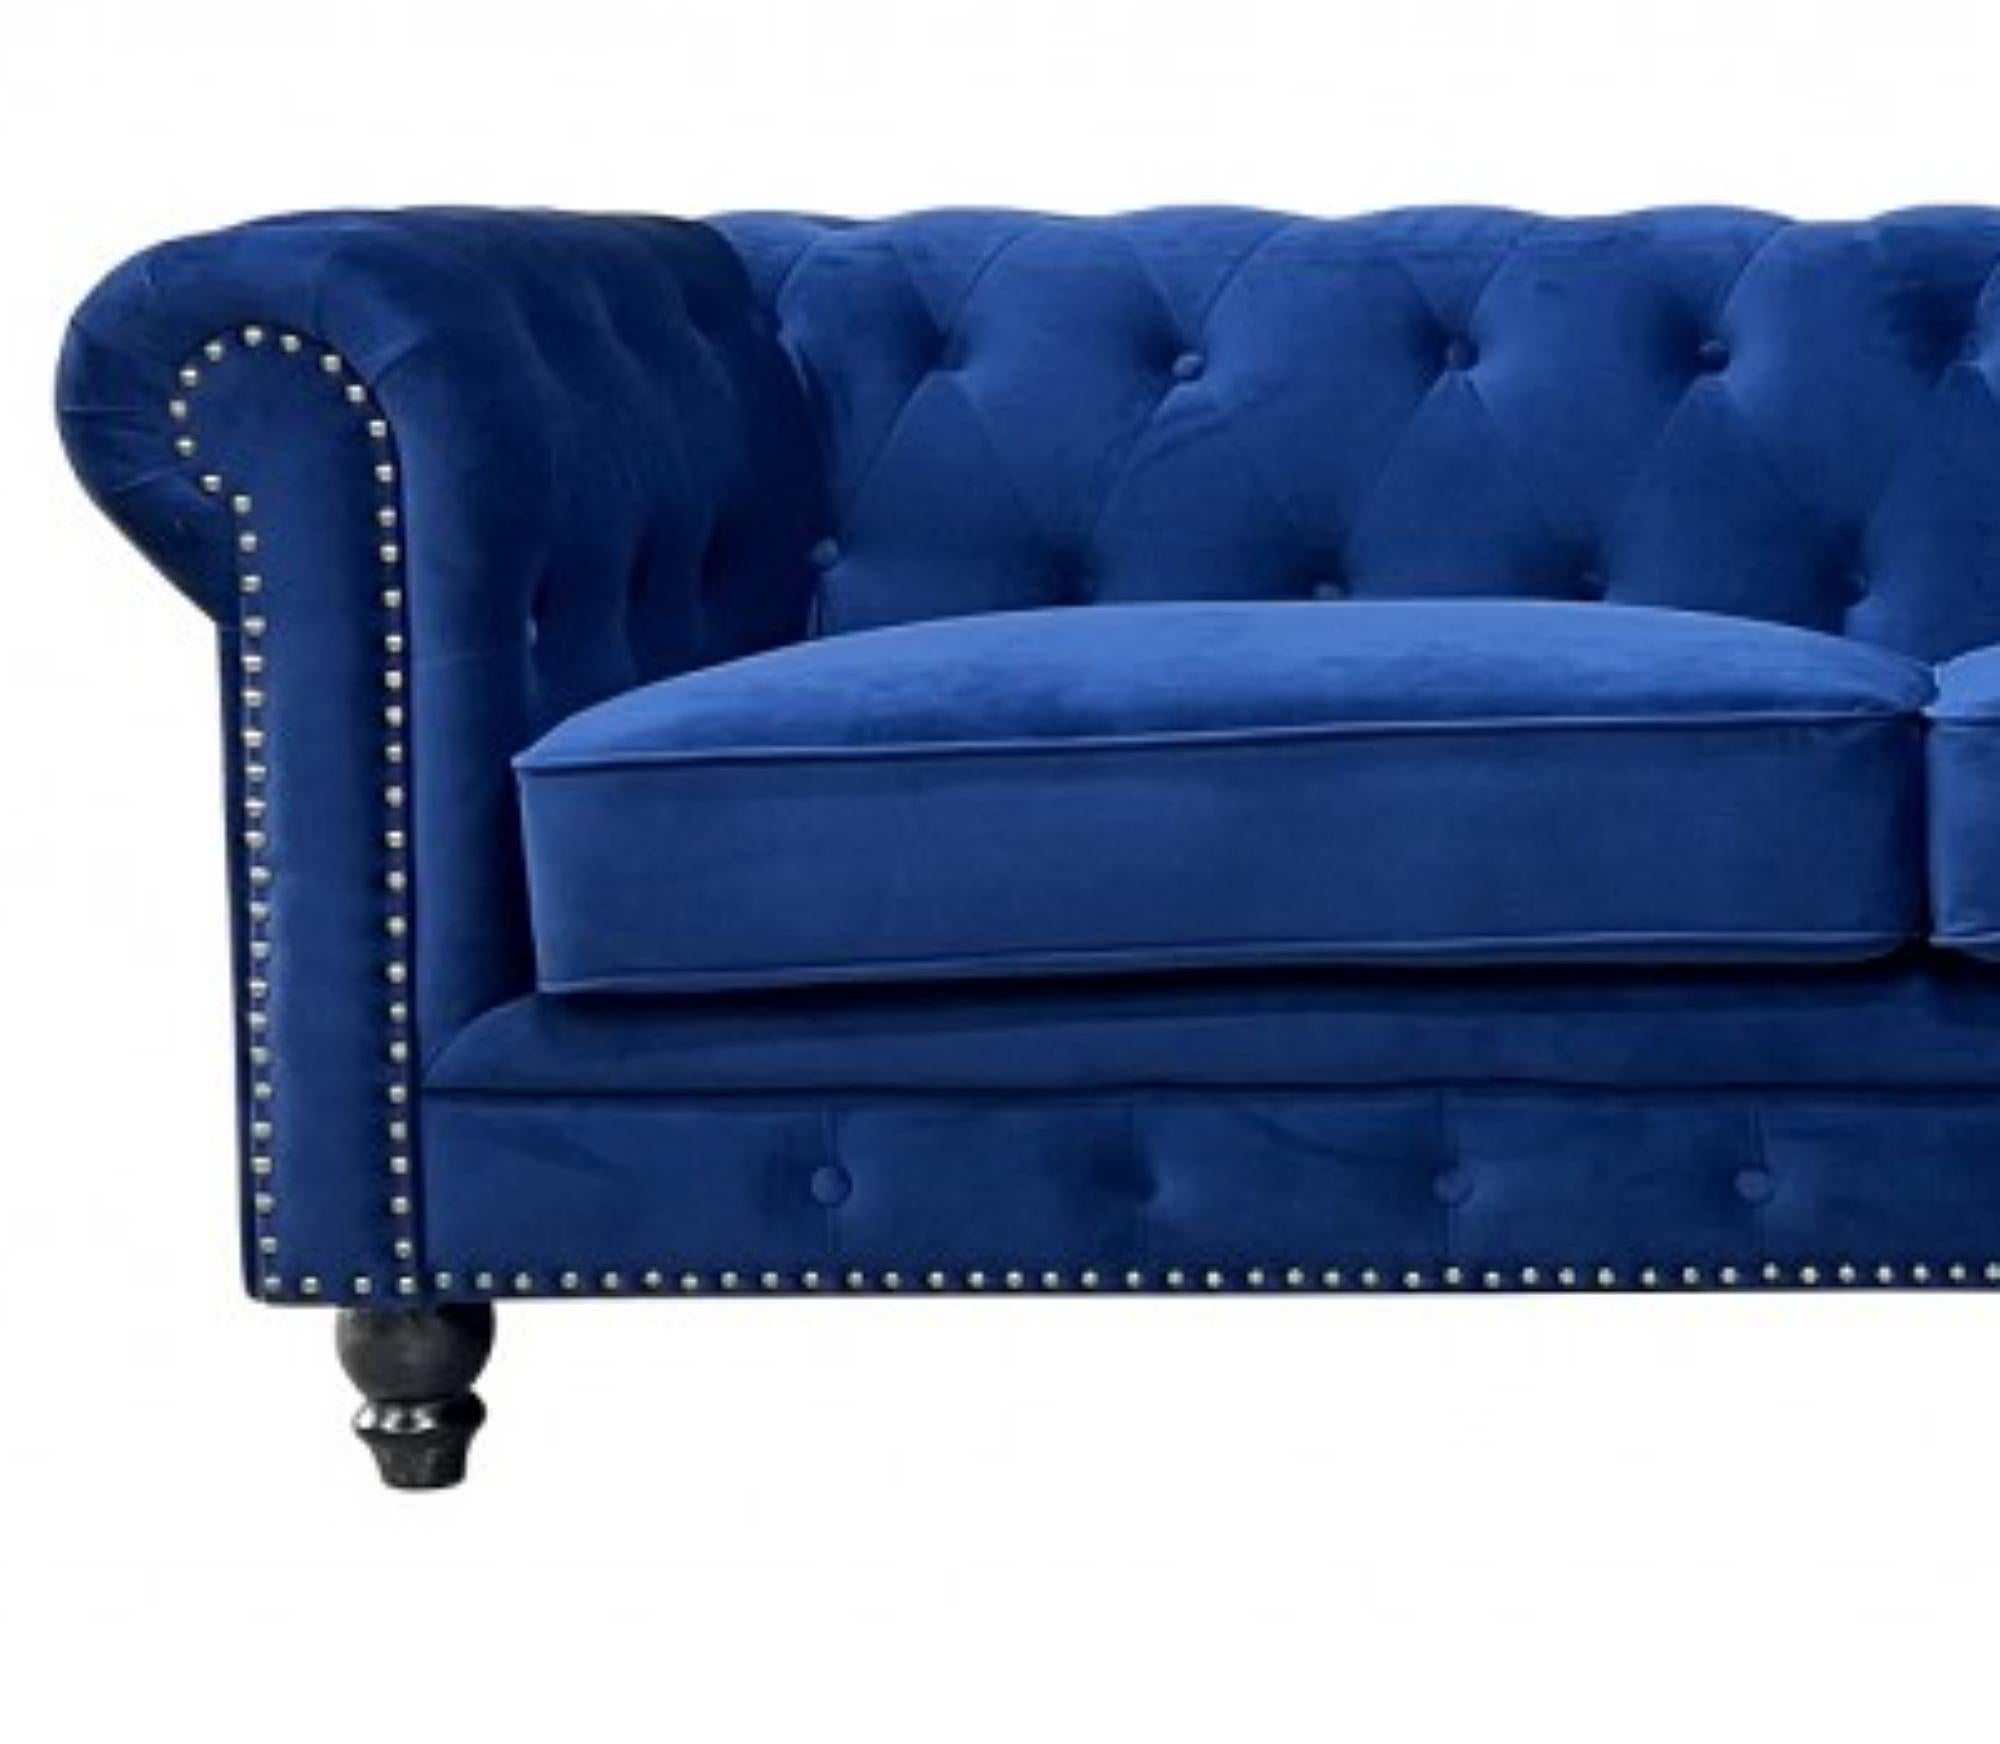 CHESTER PREMIUM 3-seater sofa, navy blue velvet upholstery

-Design sofa, 3 seats.

-Made with a solid wooden structure.

-High density polyurethane foam.

-Upholstered in navy blue velvet fabric

-2-seater sofa to match,